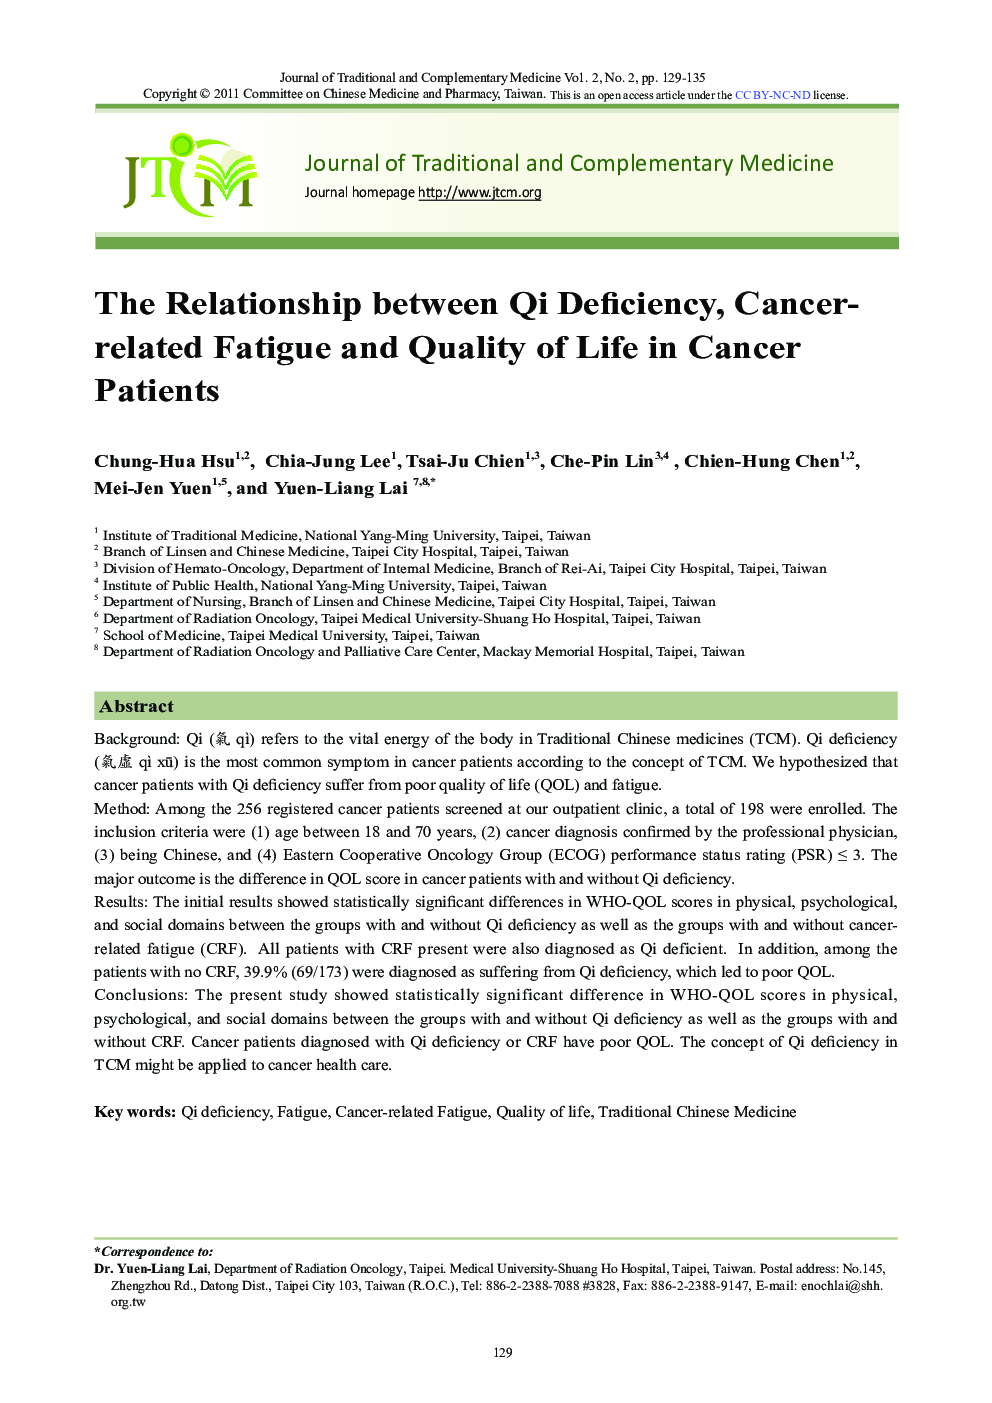 The Relationship between Qi Deficiency, Cancer-related Fatigue and Quality of Life in Cancer Patients 6